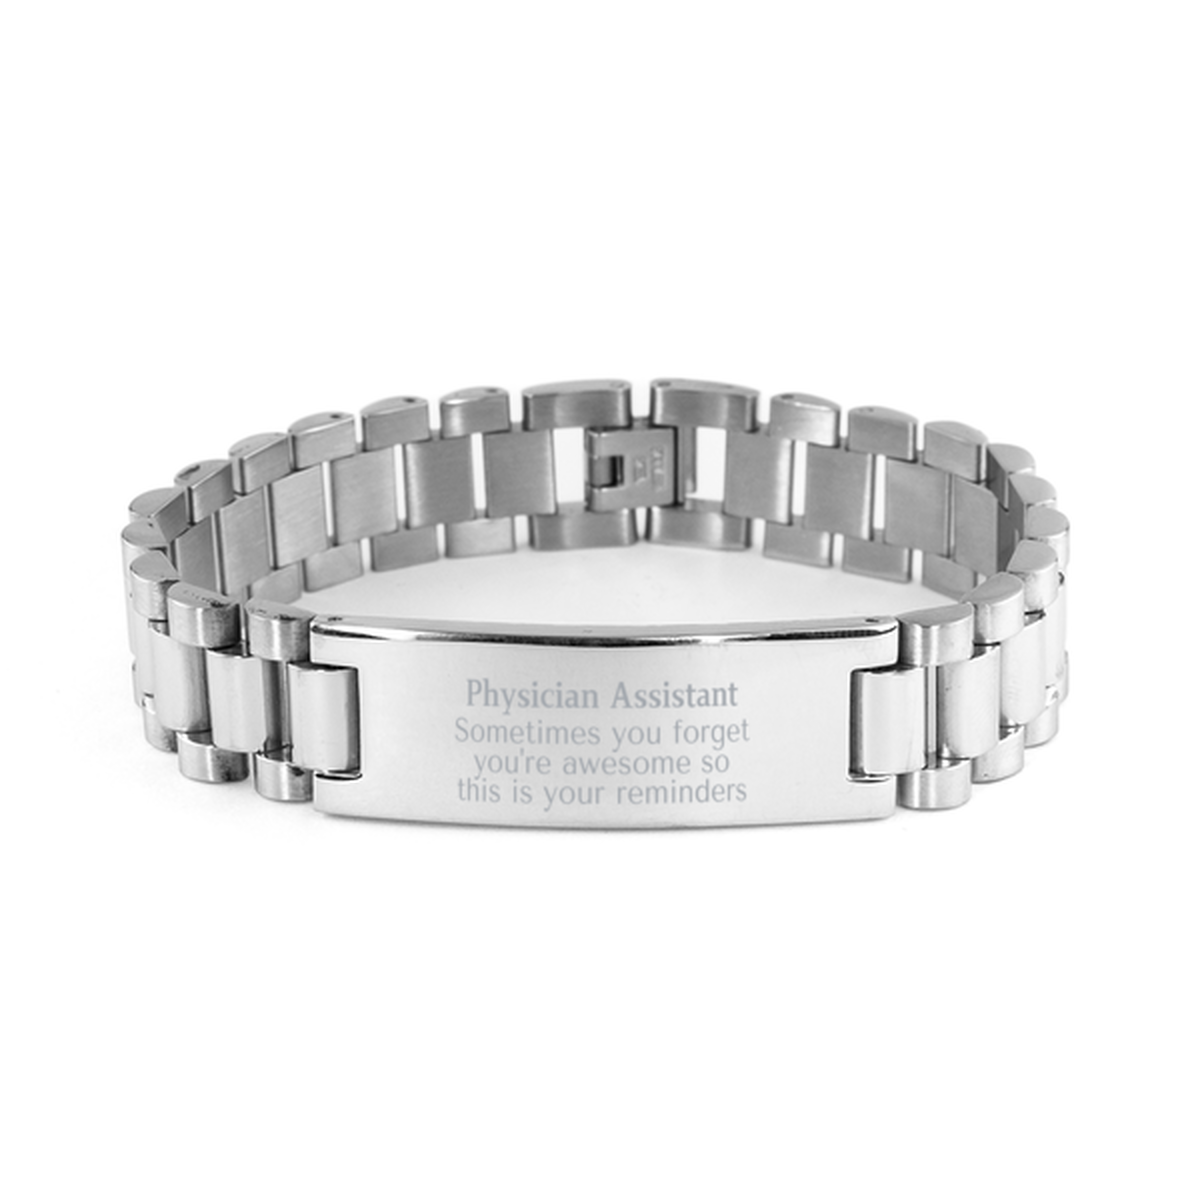 Sentimental Physician Assistant Ladder Stainless Steel Bracelet, Physician Assistant Sometimes you forget you're awesome so this is your reminders, Graduation Christmas Birthday Gifts for Physician Assistant, Men, Women, Coworkers